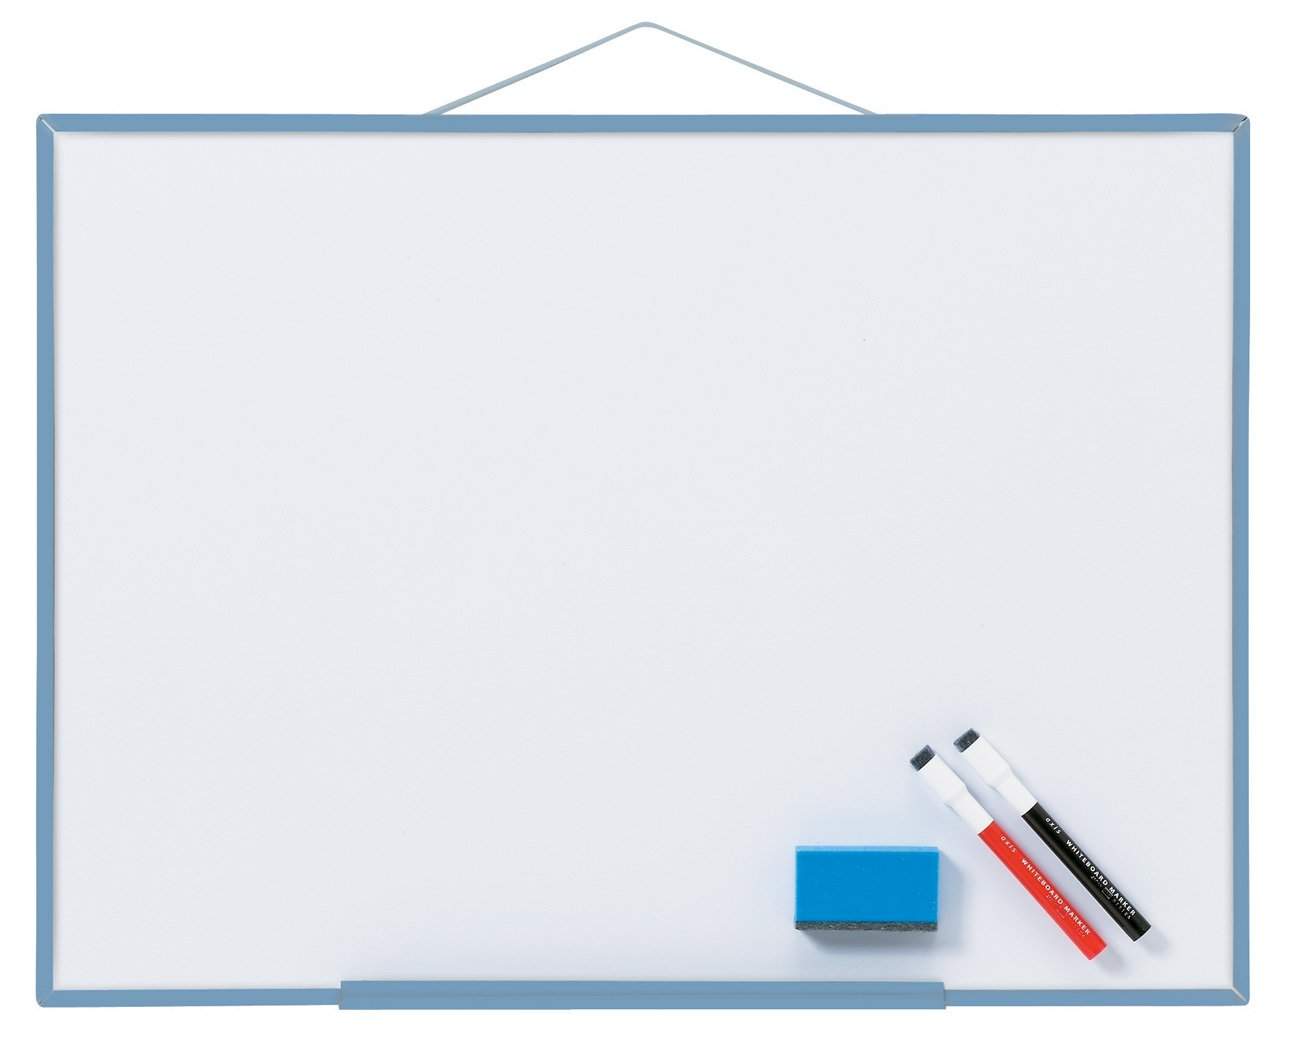 Whiteboard Photos Download The BEST Free Whiteboard Stock Photos  HD  Images